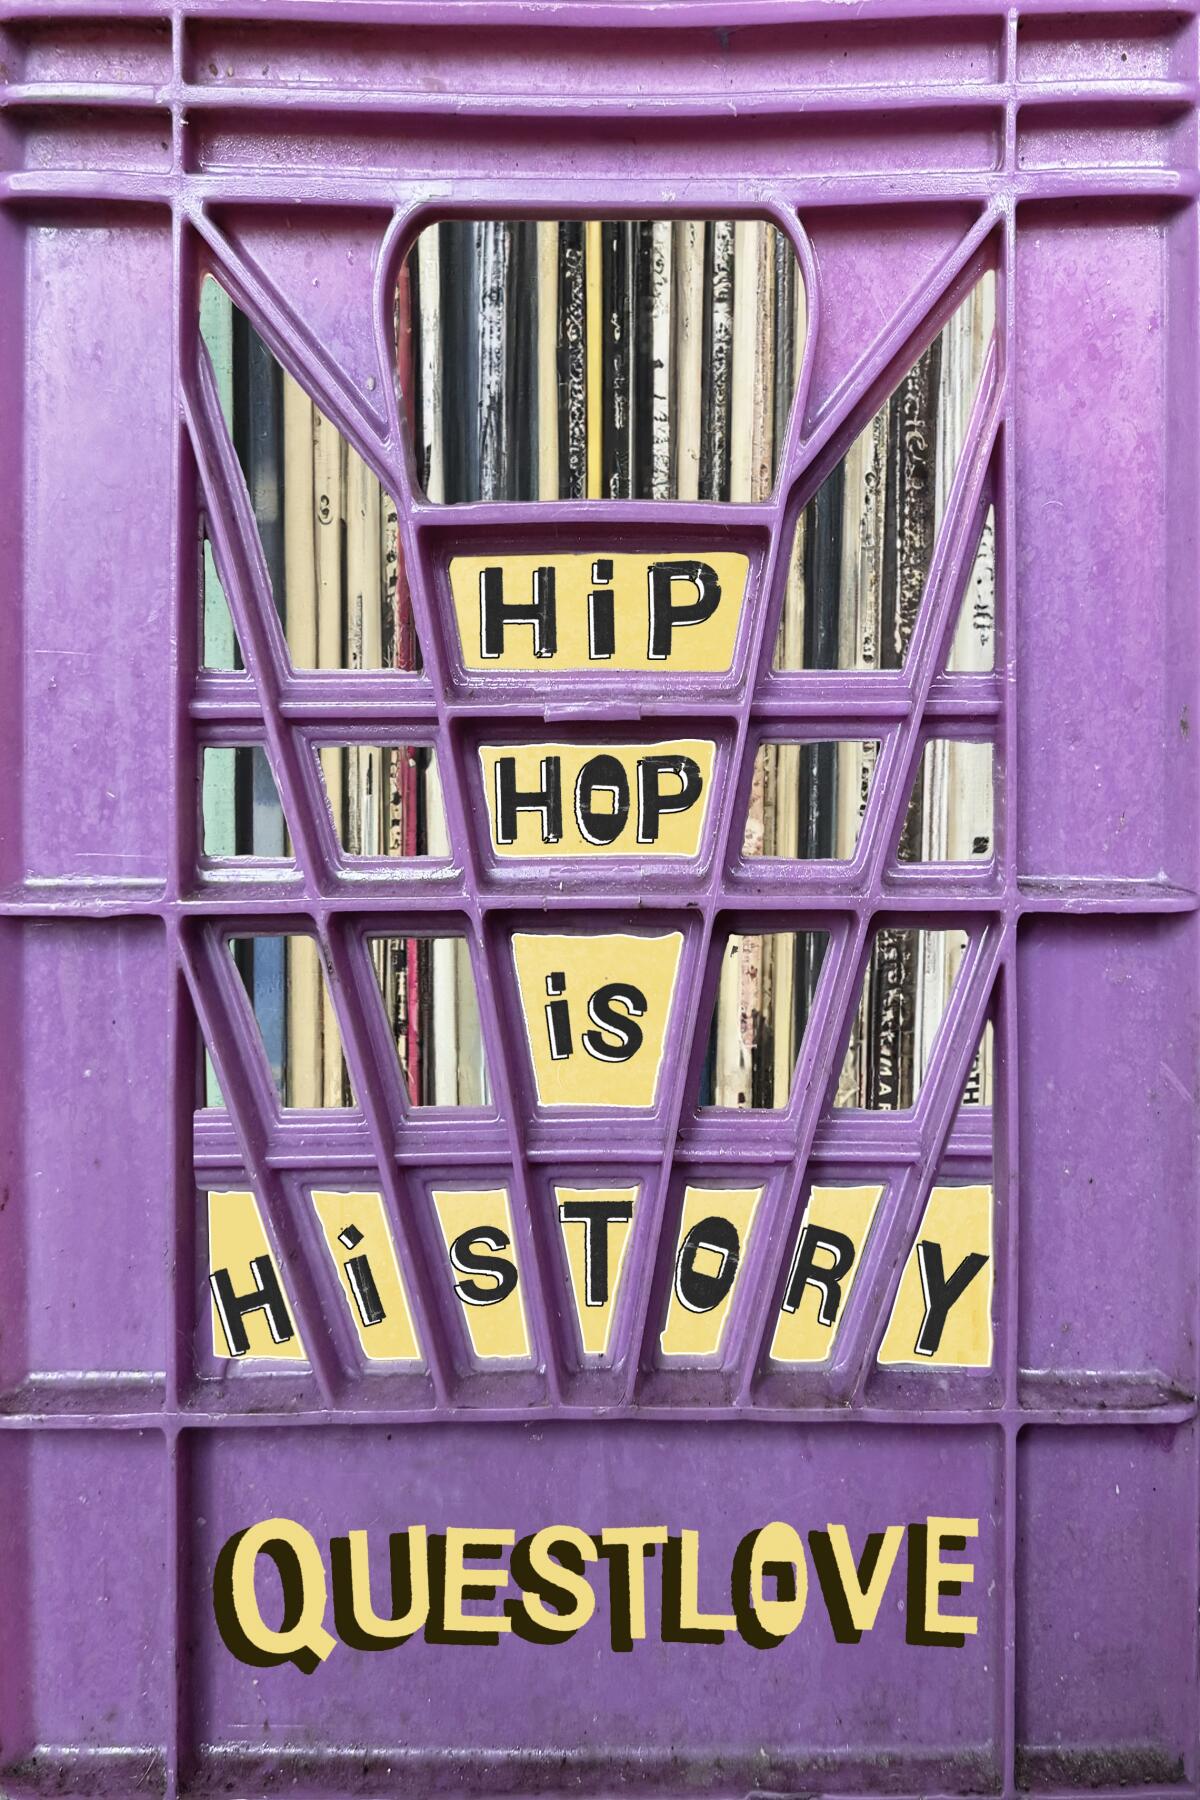 A purple book cover with the title "Hip-Hop Is History," by Questlove